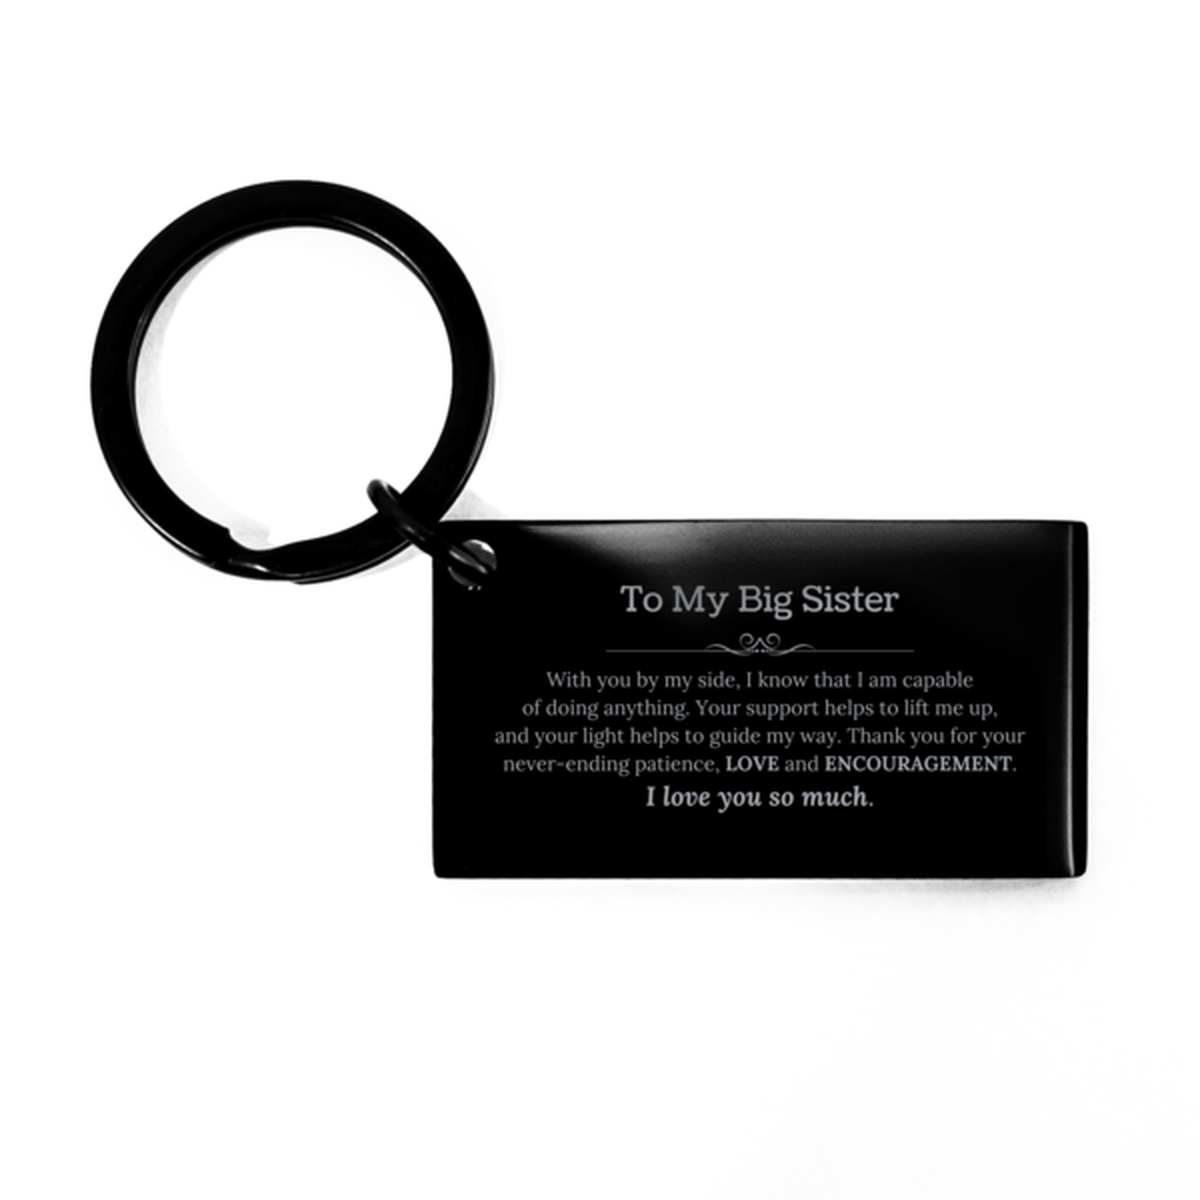 Appreciation Big Sister Keychain Gifts, To My Big Sister Birthday Christmas Wedding Keepsake Gifts for Big Sister With you by my side, I know that I am capable of doing anything. I love you so much